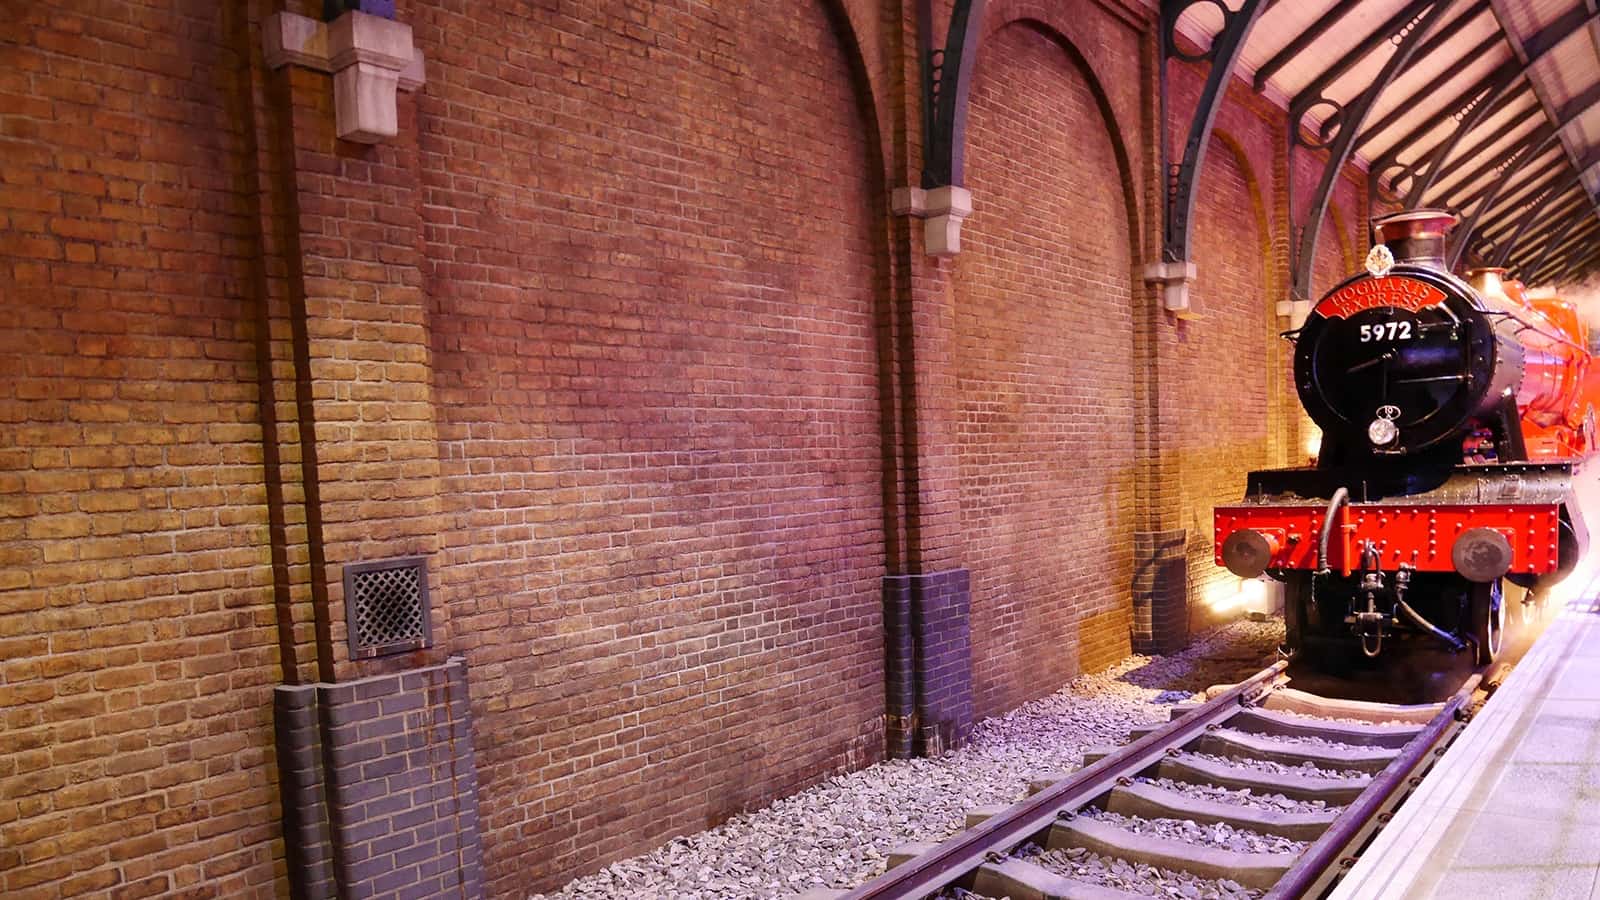 An image of the Hogwarts Express at Warner Brother's Studio